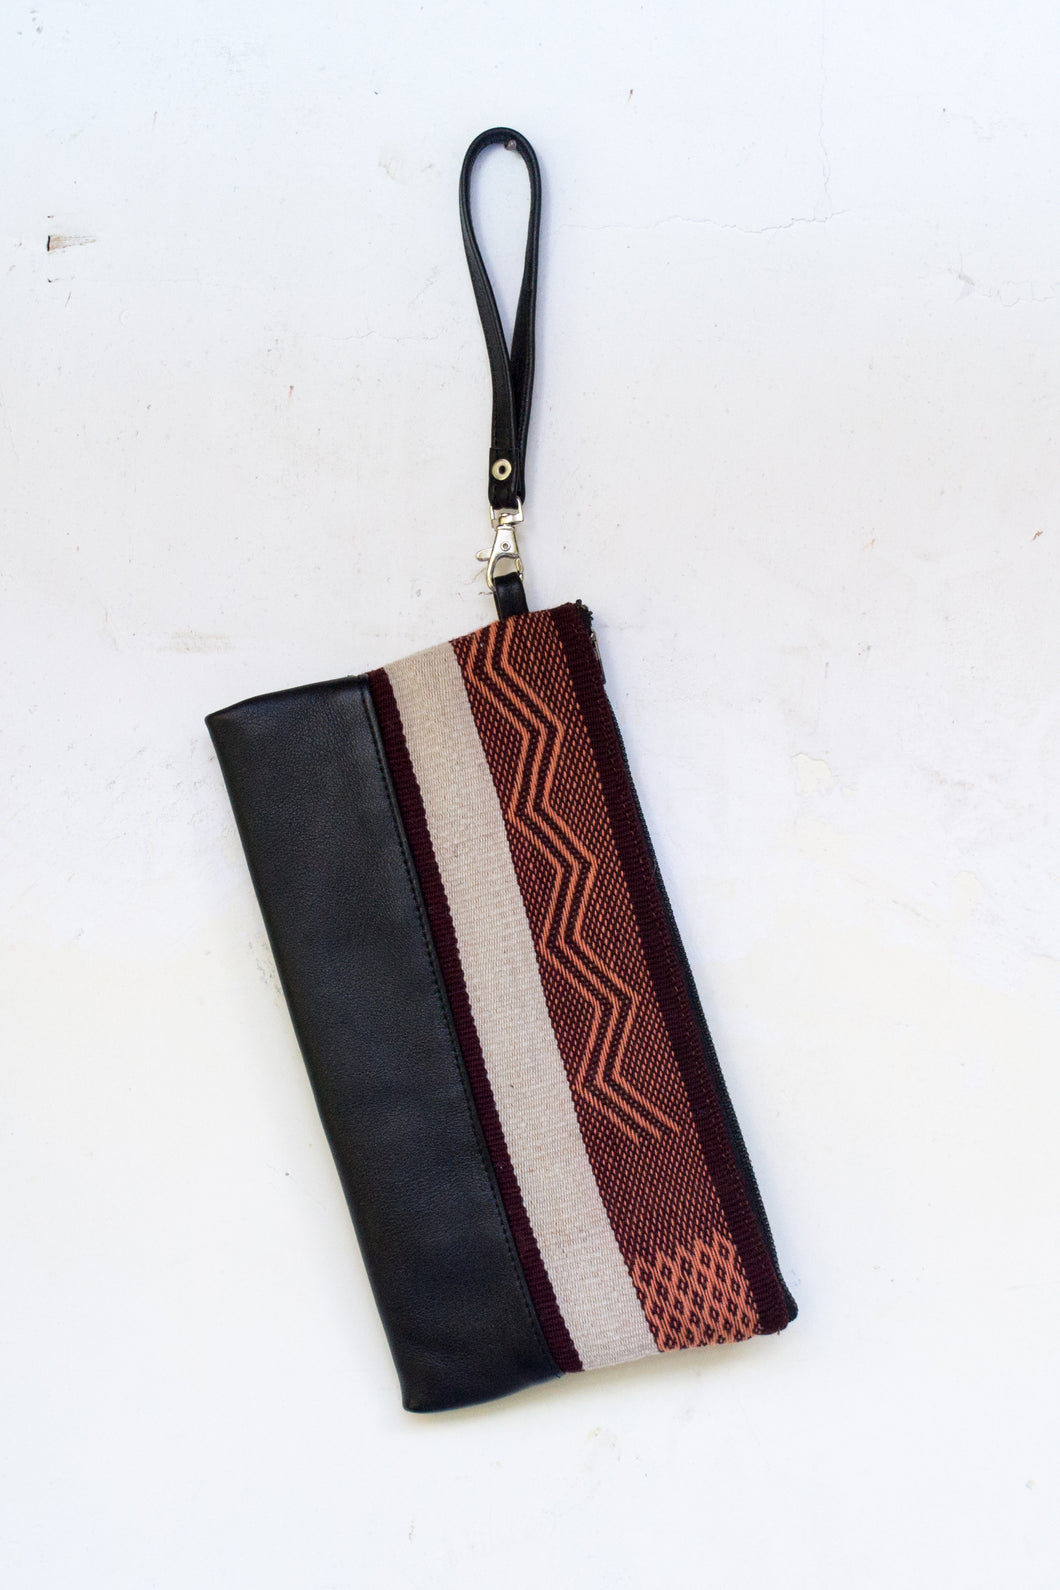 Rumi Stone Collection | Peruvian Sheep’s Wool & Leather Clutch